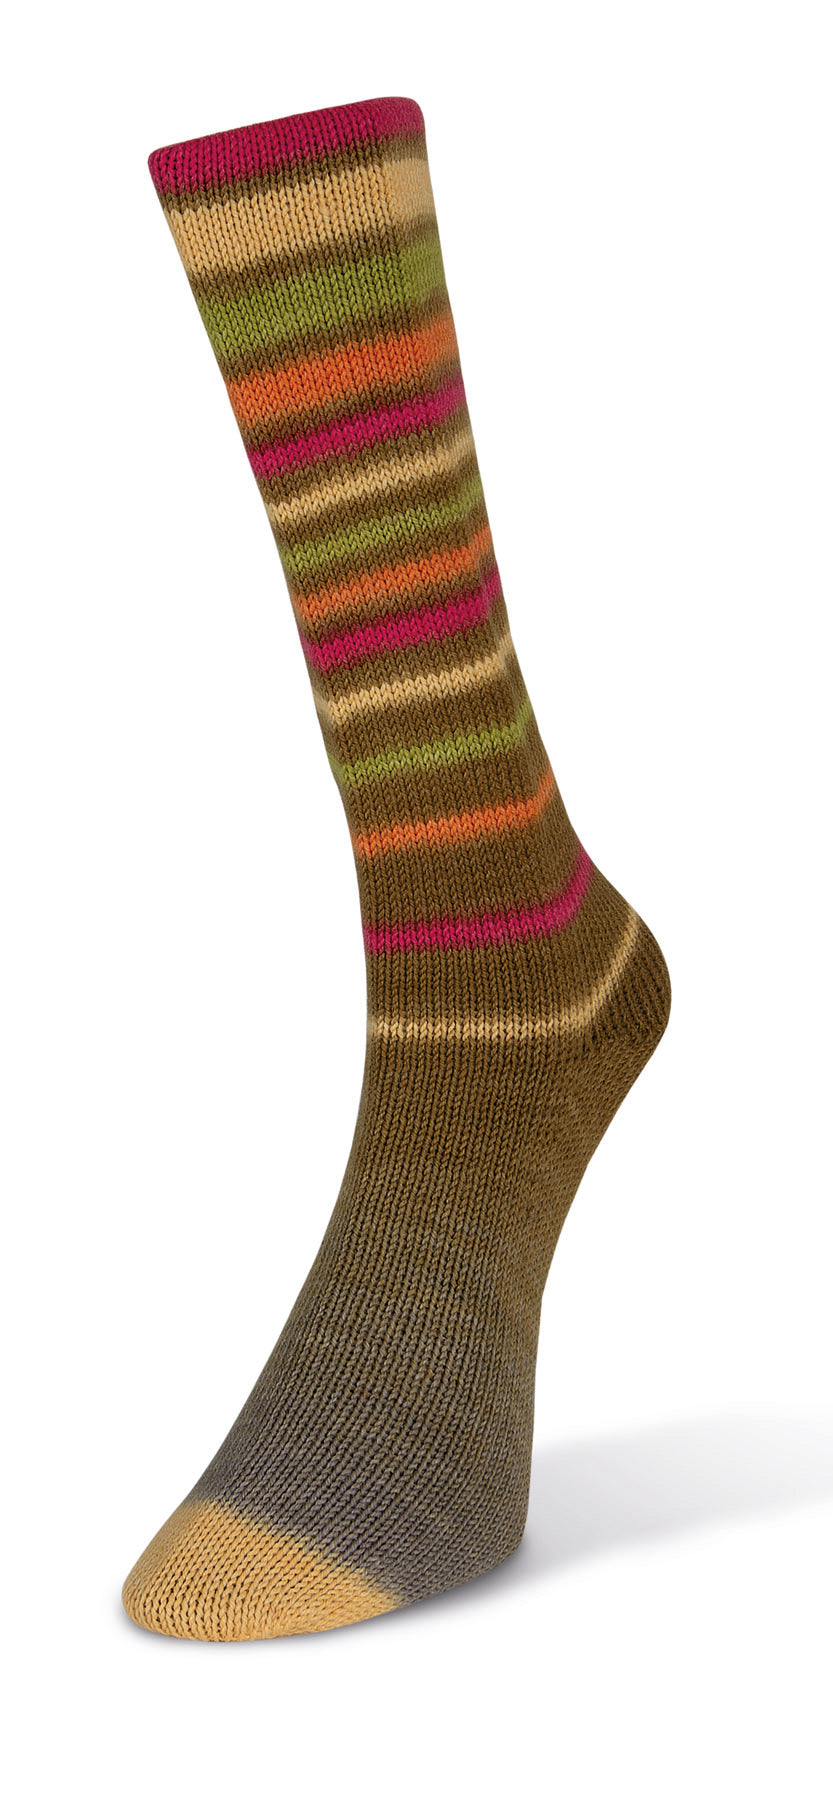 Laines de Nord Inifinity Sock color brown pink green 